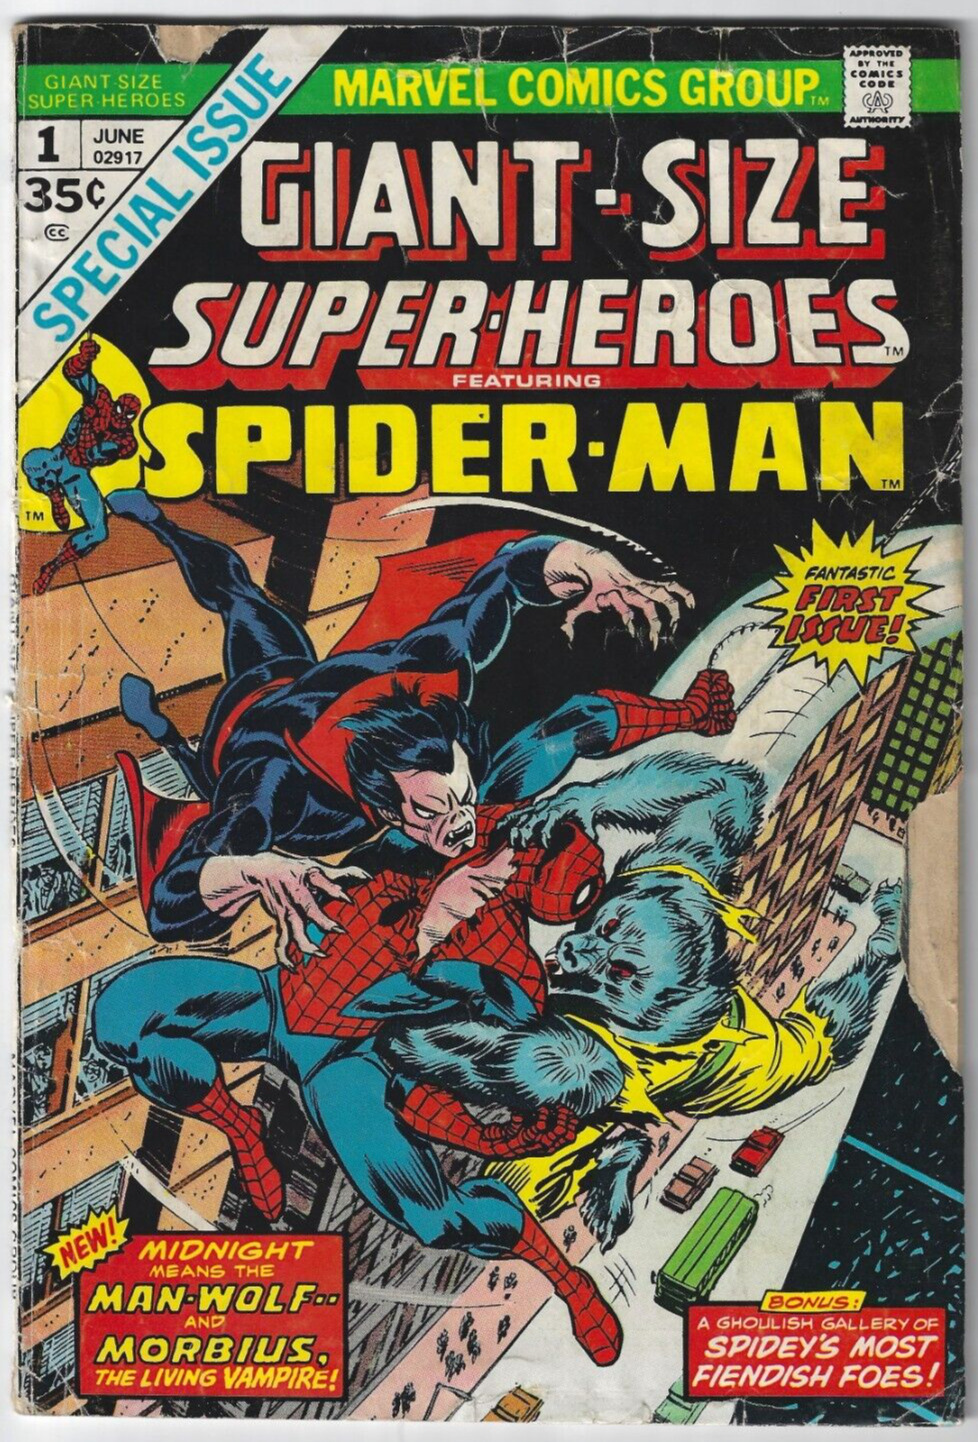 Giant-Size Superheroes #1 (1974) Spider-Man Morbius Man-Wolf Low Grade F